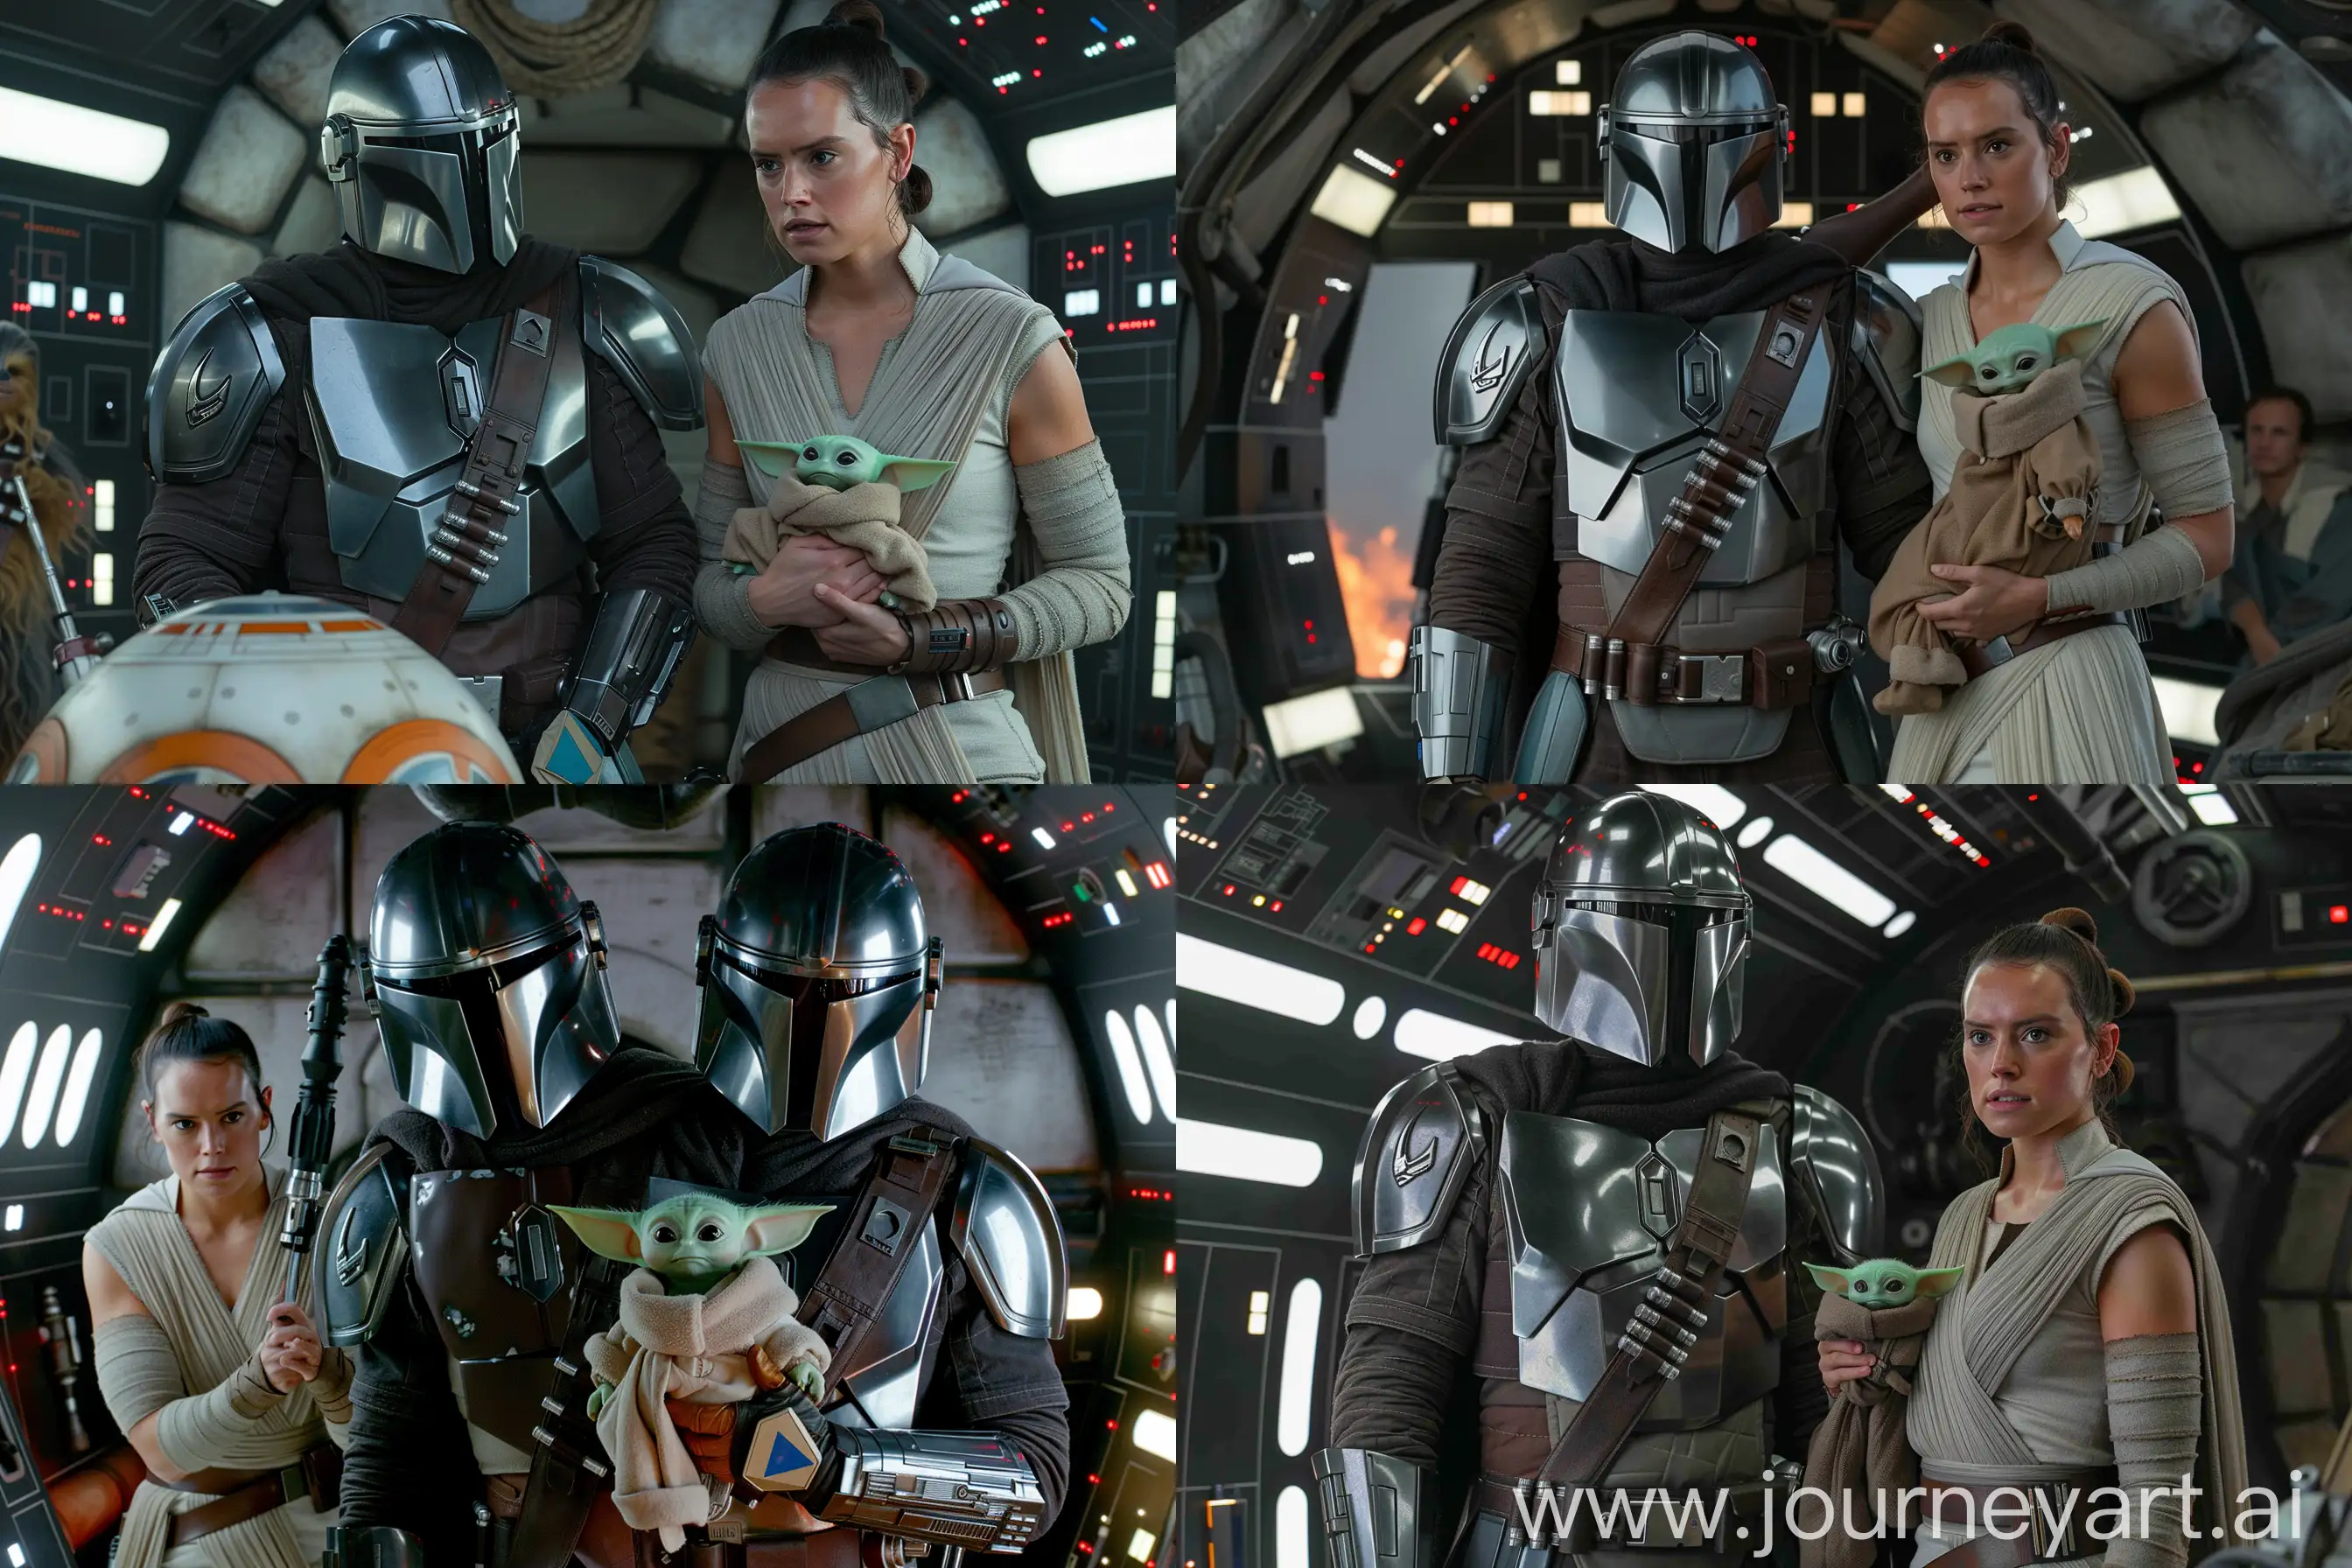 Epic-Cinematic-Still-Mandalorian-and-Rey-Skywalker-with-Baby-Yoda-in-Spaceship